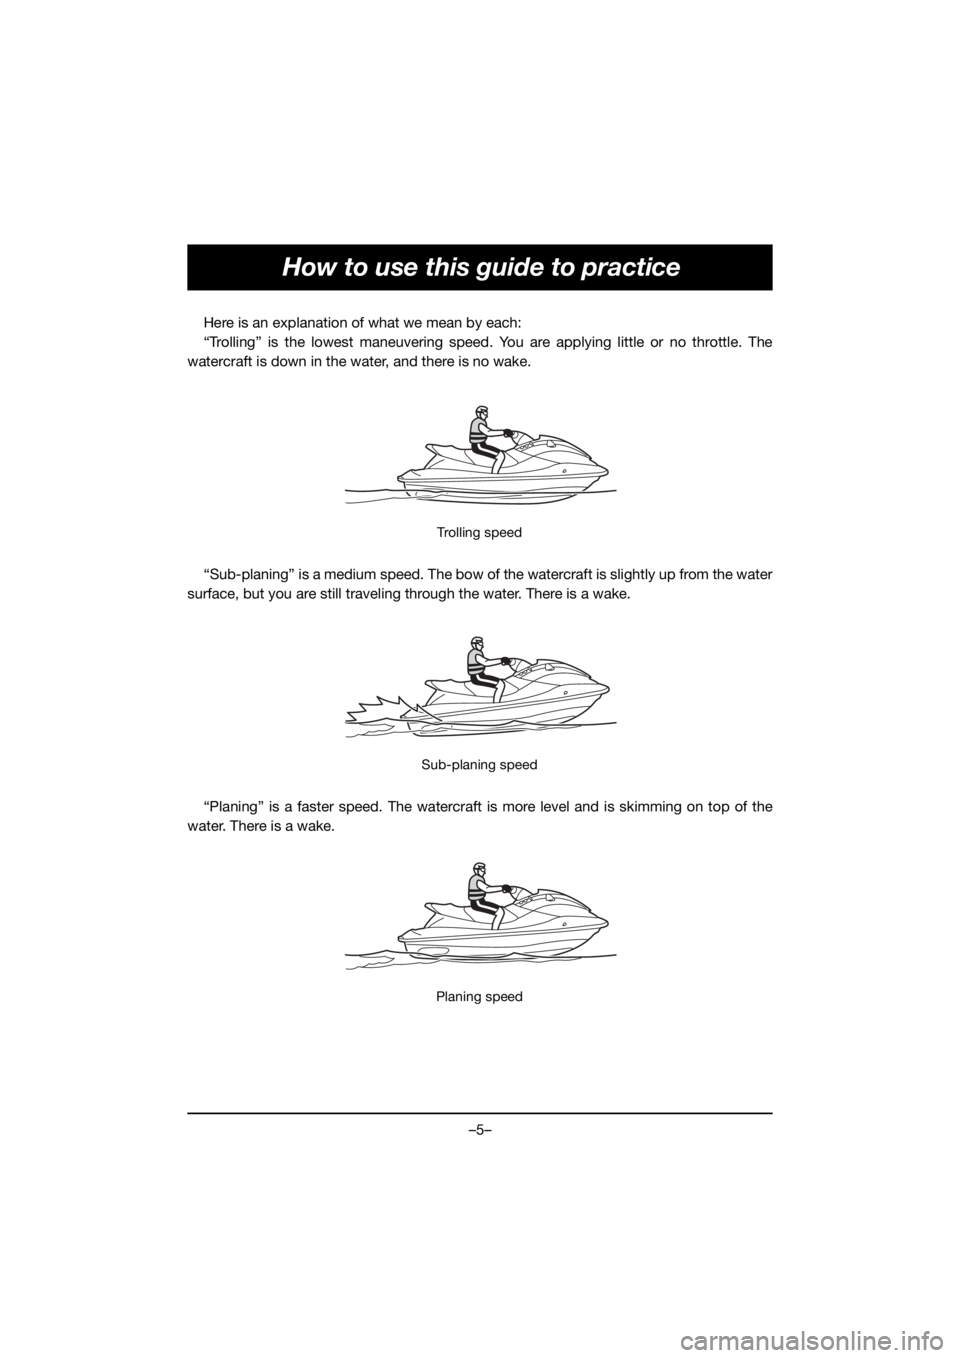 YAMAHA EX 2021  Manuale de Empleo (in Spanish) –5–
How to use this guide to practice
Here is an explanation of what we mean by each:
“Trolling” is the lowest maneuvering speed. You are applying little or no throttle. The
watercraft is down